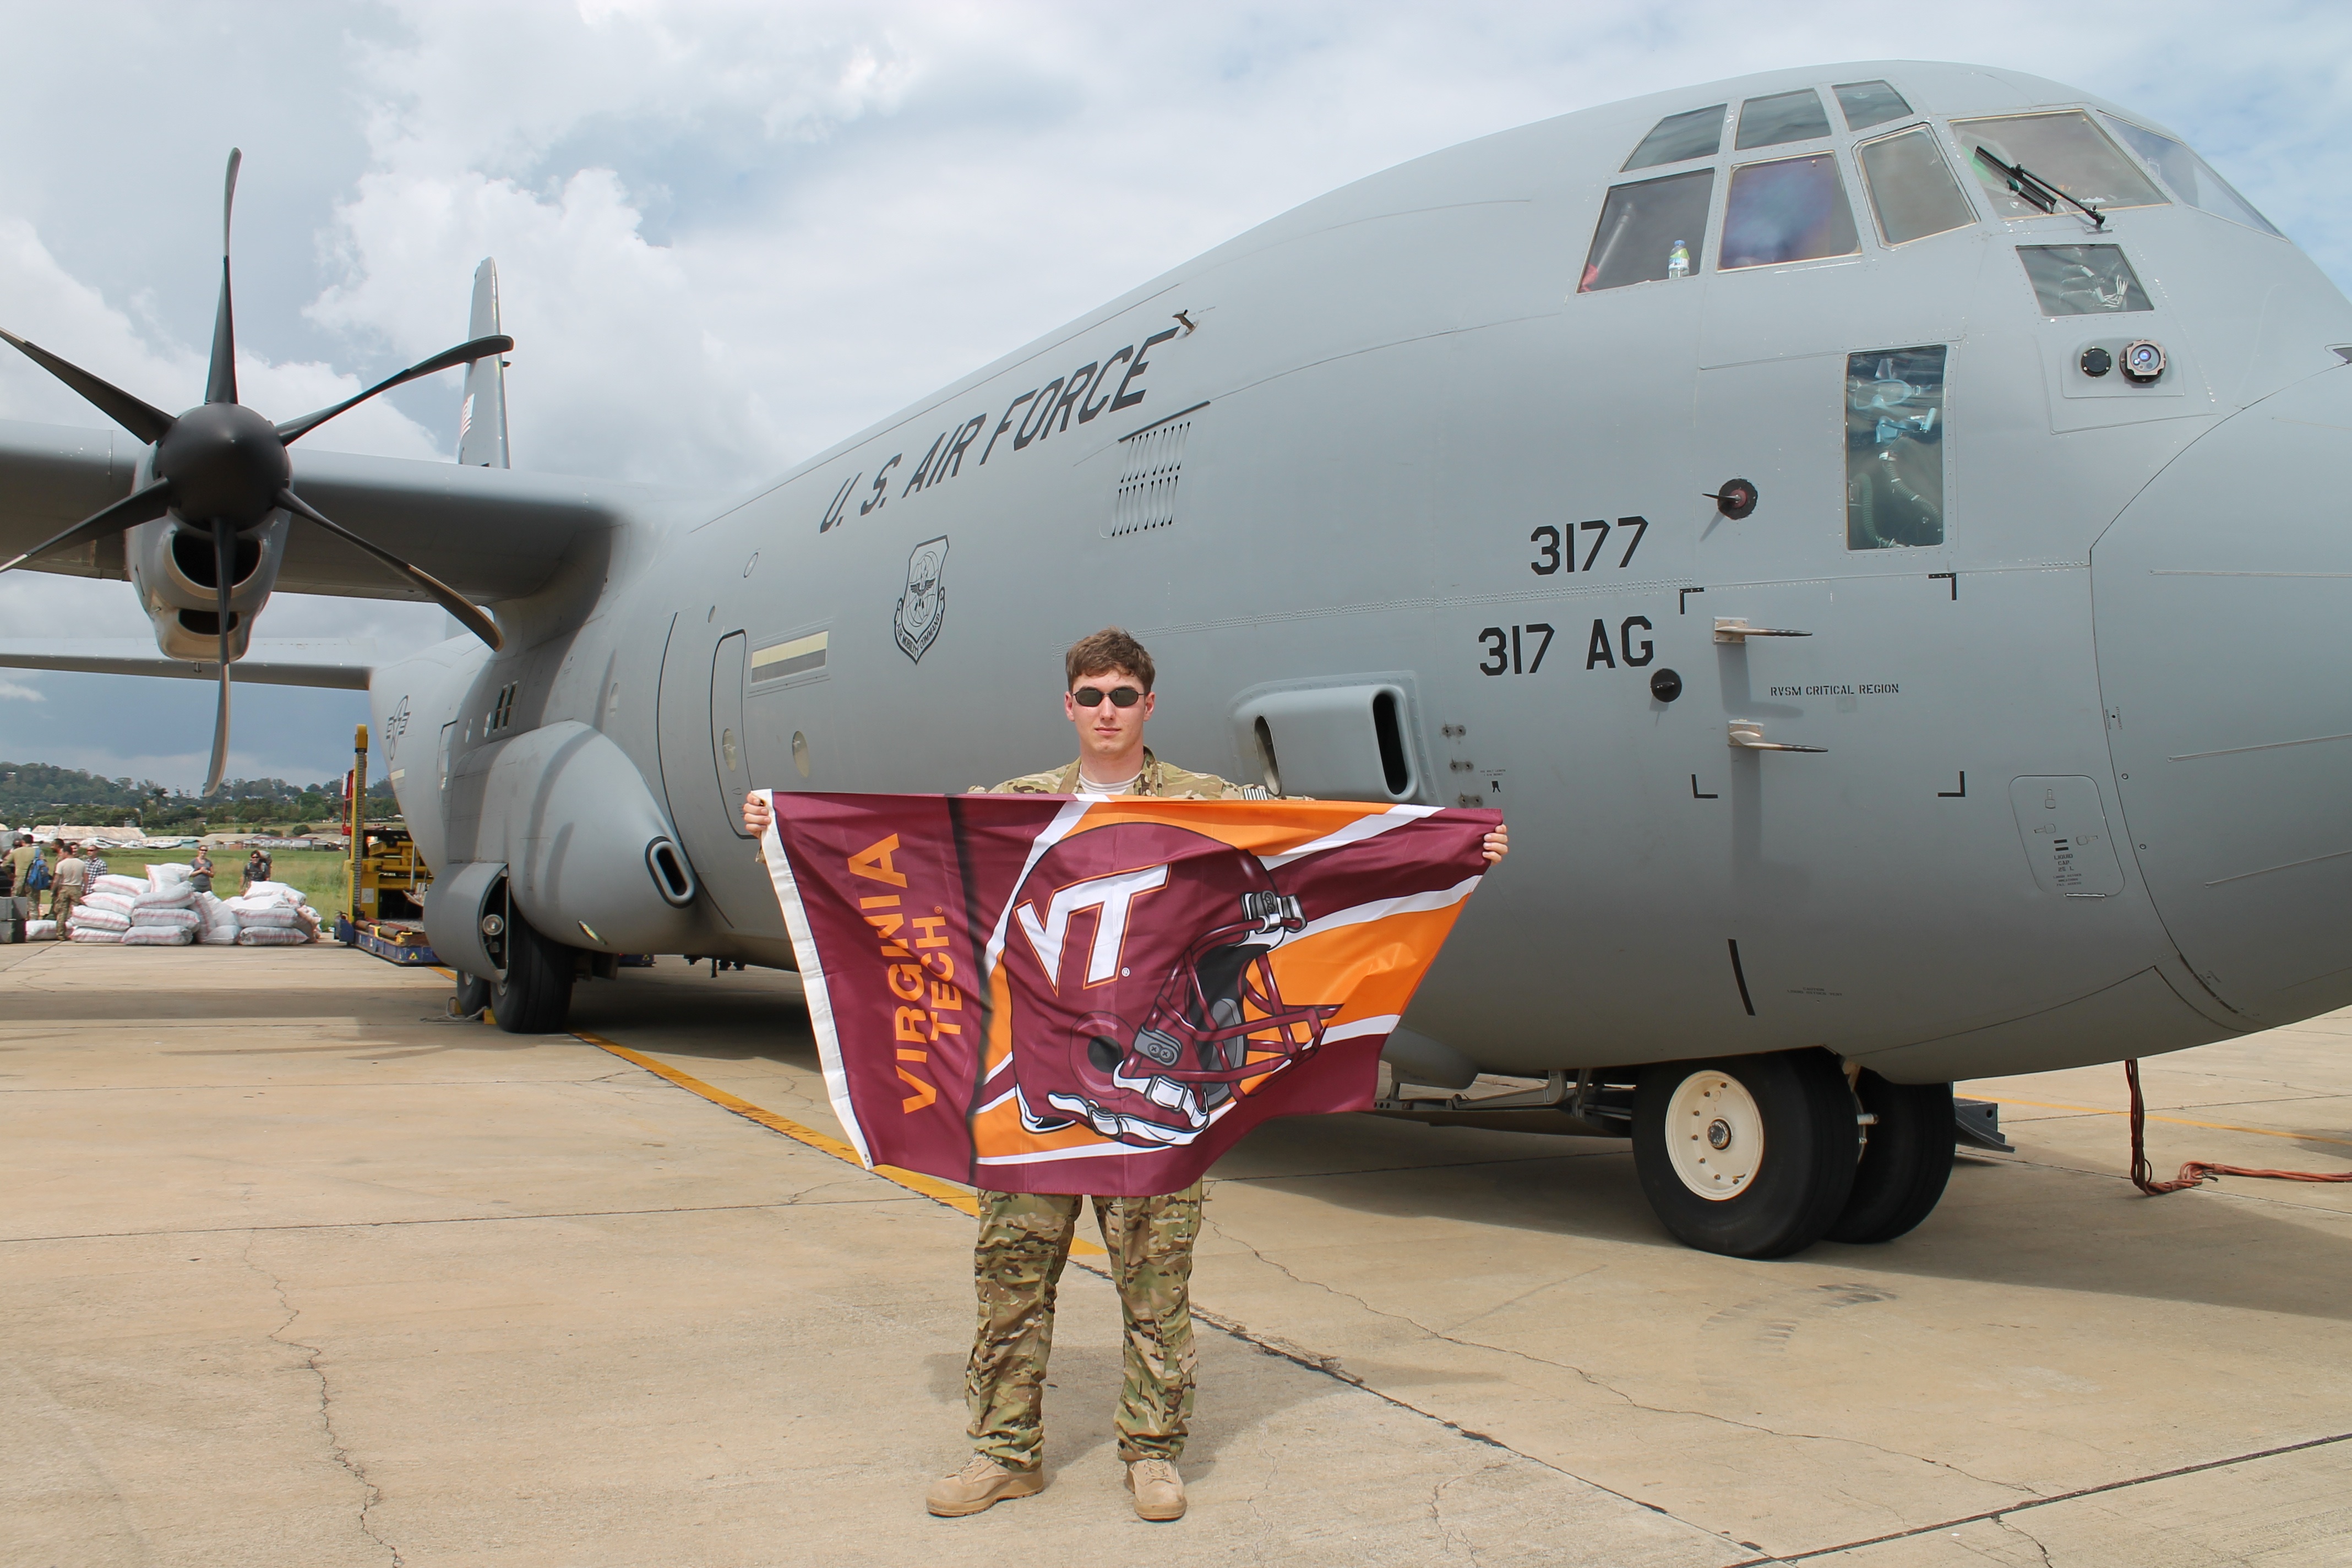 1st Lt. David Jacobs, U.S. Air Force, Virginia Tech Corps of Cadets Class of 2011 standing in front of a C-130J aircraft.